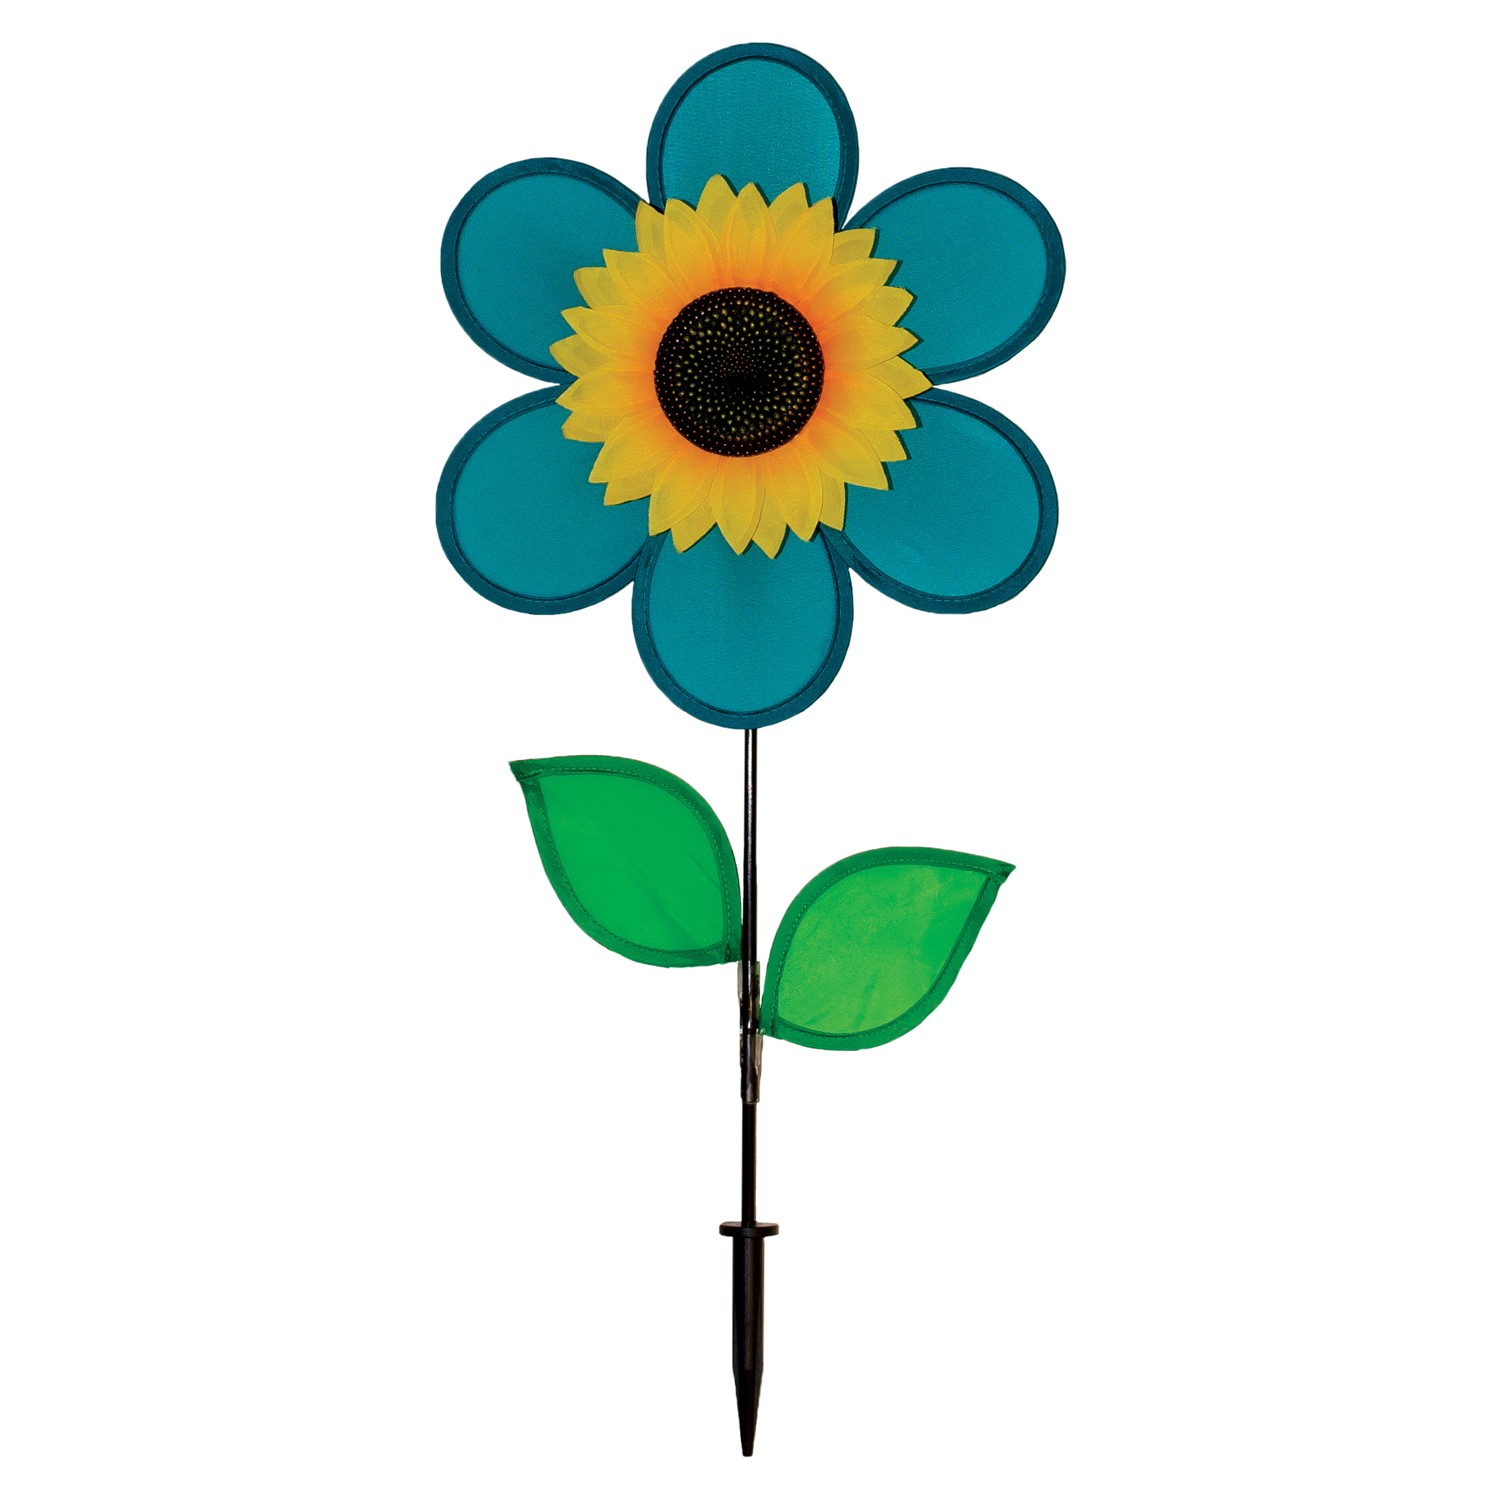 In the Breeze 12" Teal Sunflower with Leaves 2776